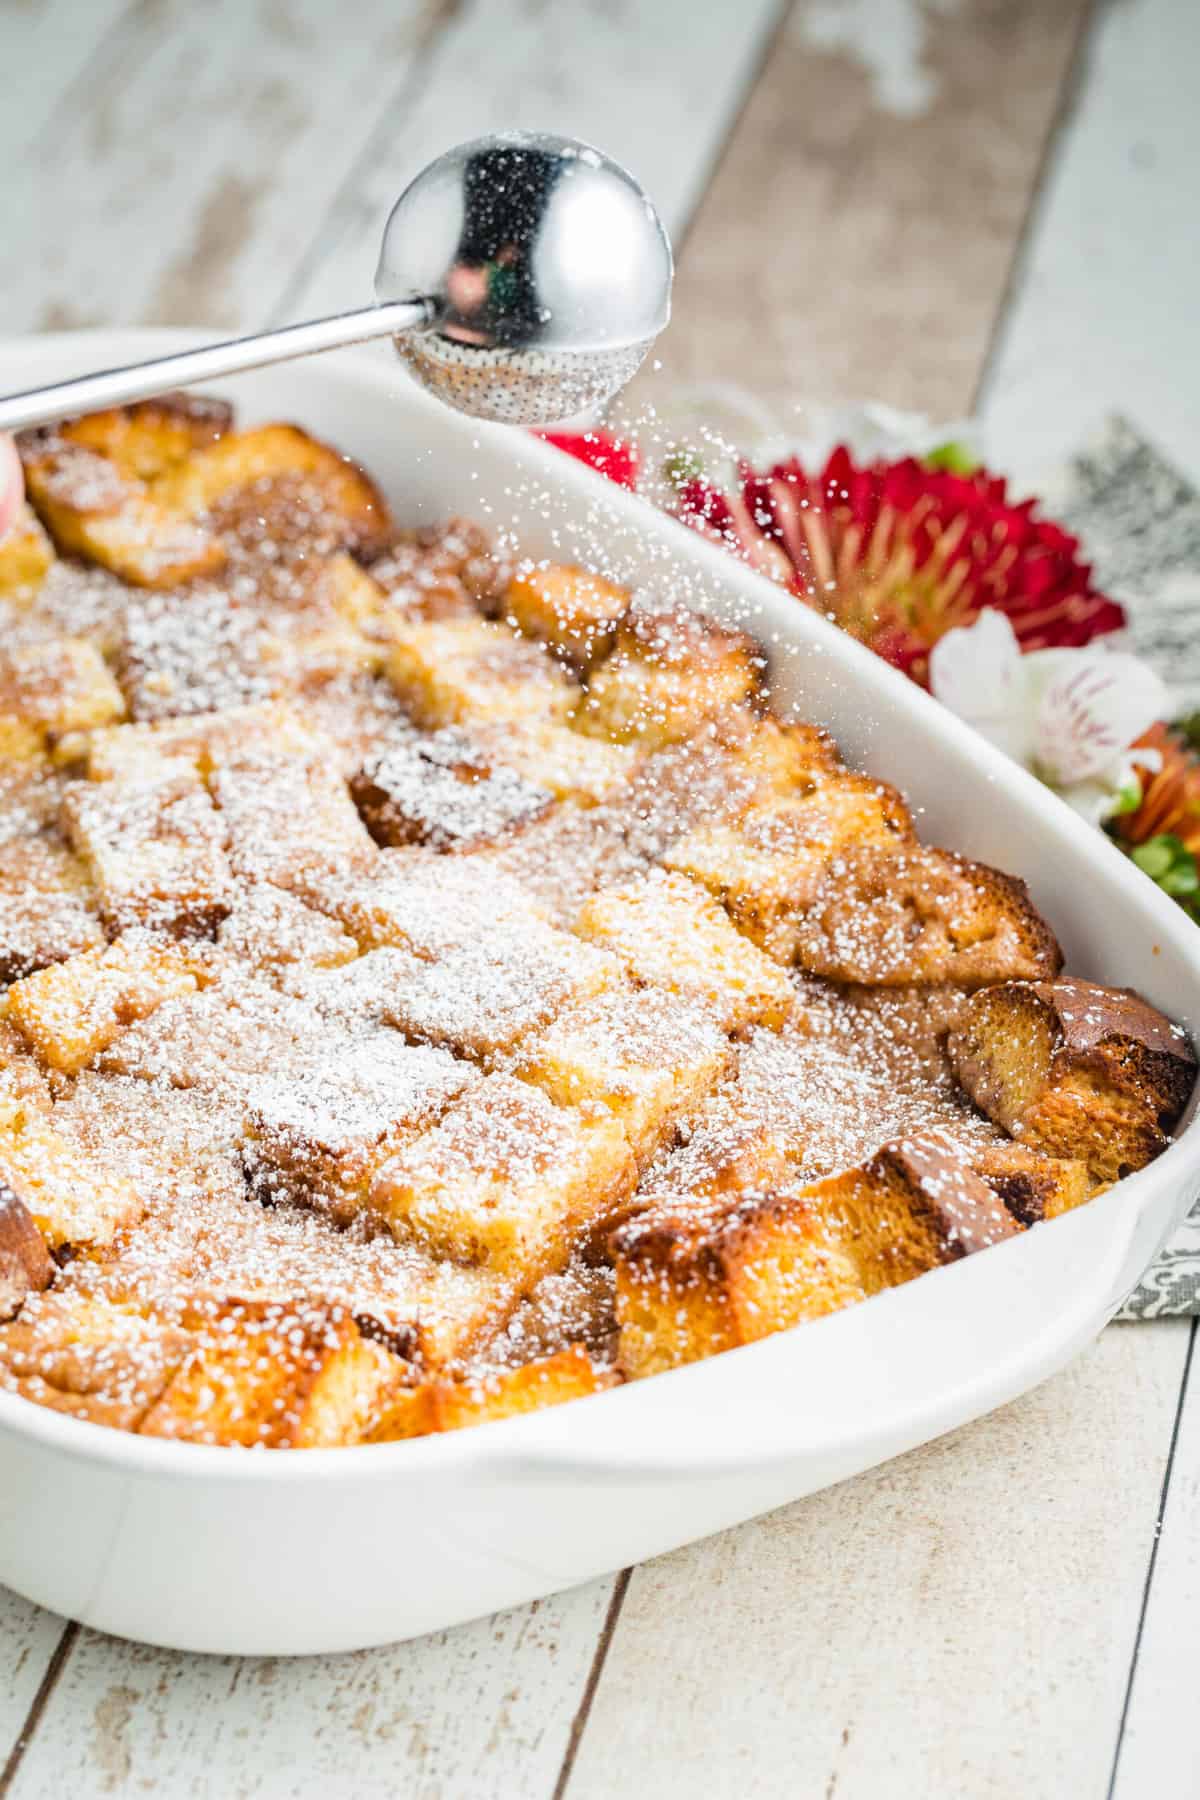 Powdered sugar being sprinkled over french toast casserole.